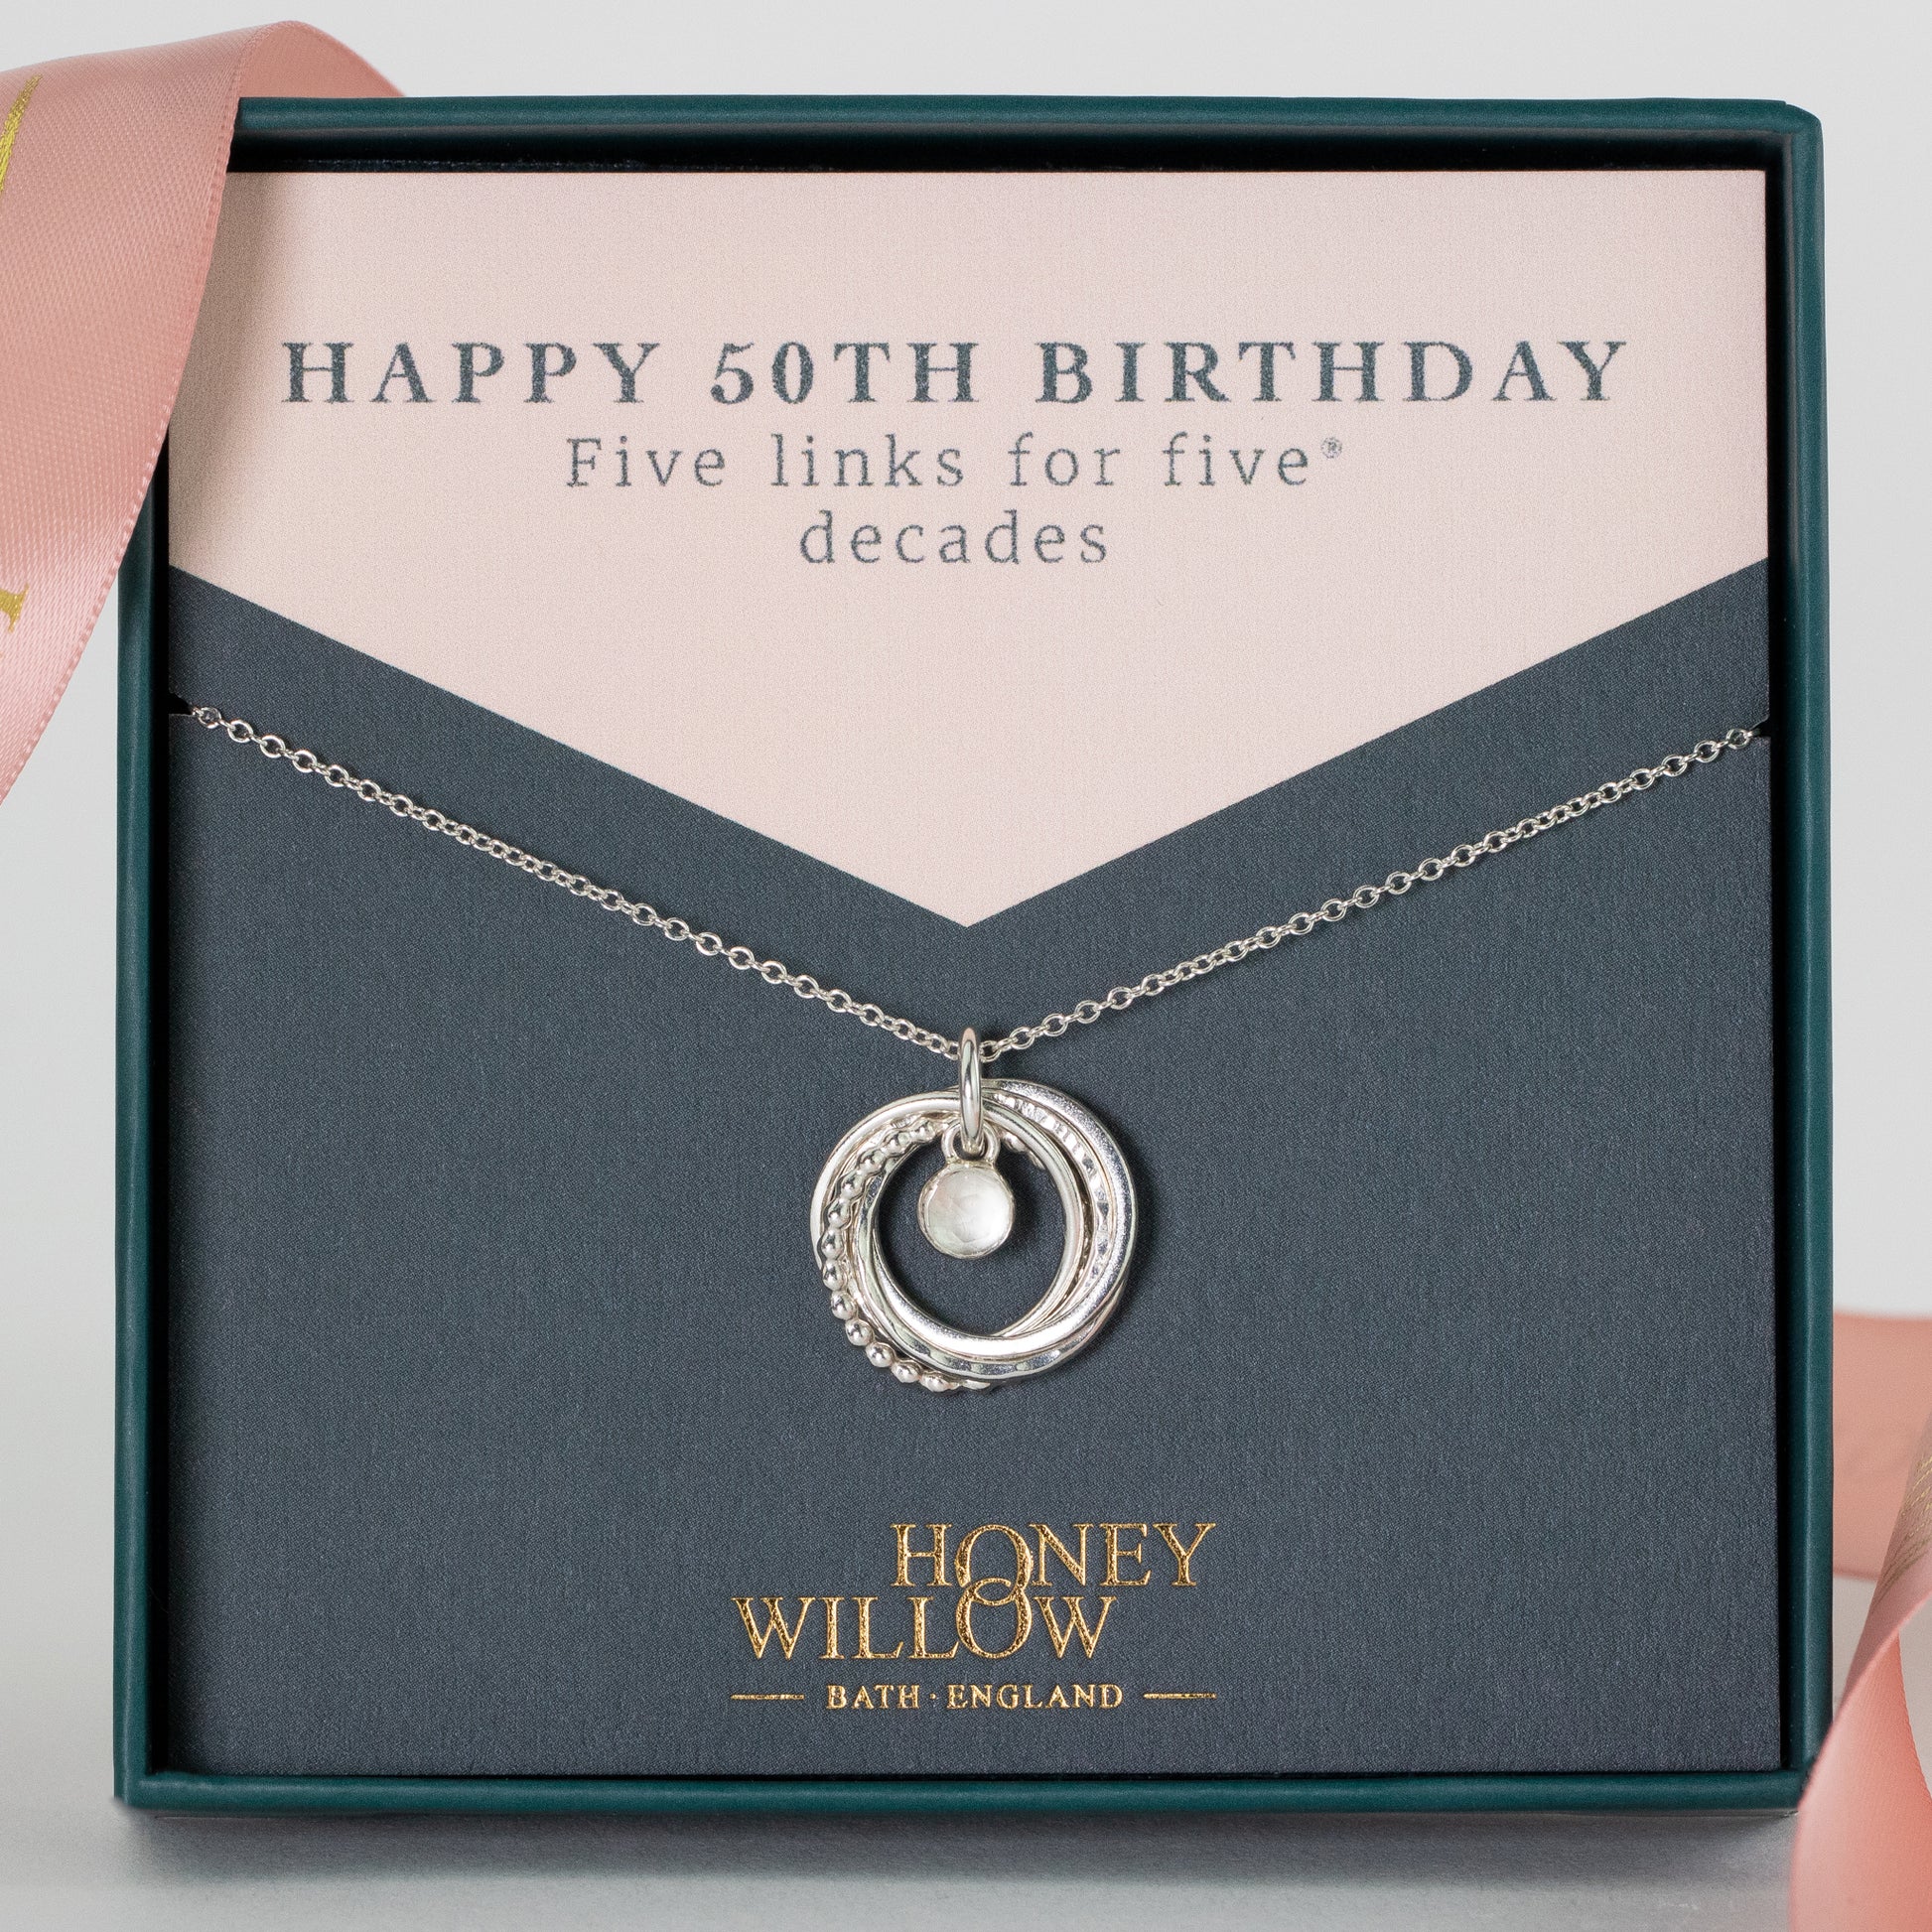 50th Birthday Birthstone Necklace - The Original 5 Links for 5 Decades Necklace - Petite Silver